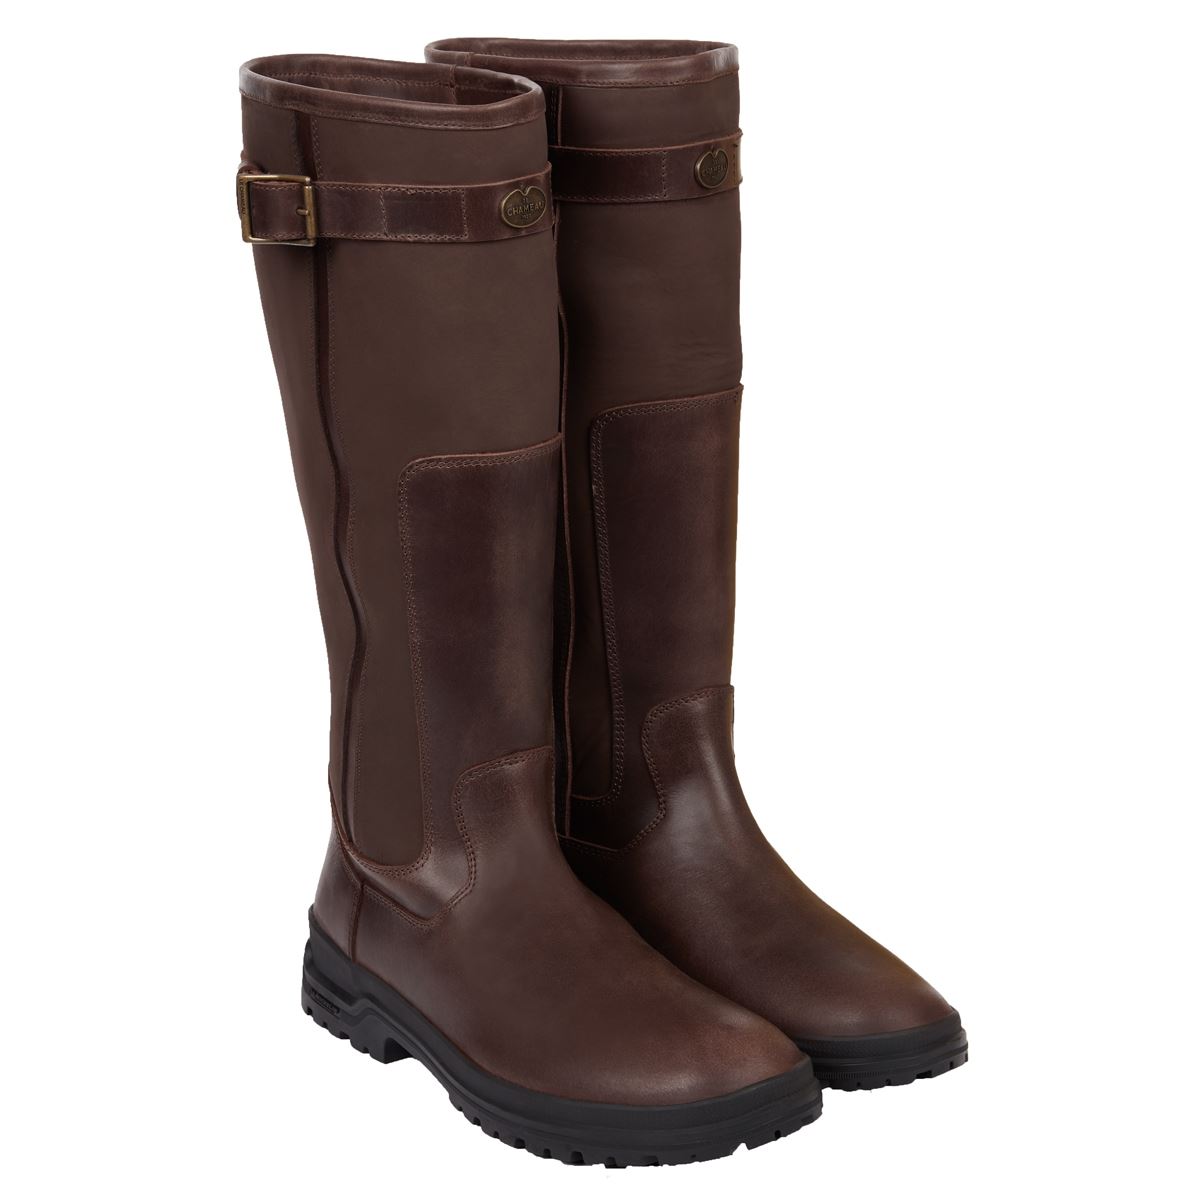 What are the features of the le chameau jameson boot wide fit?